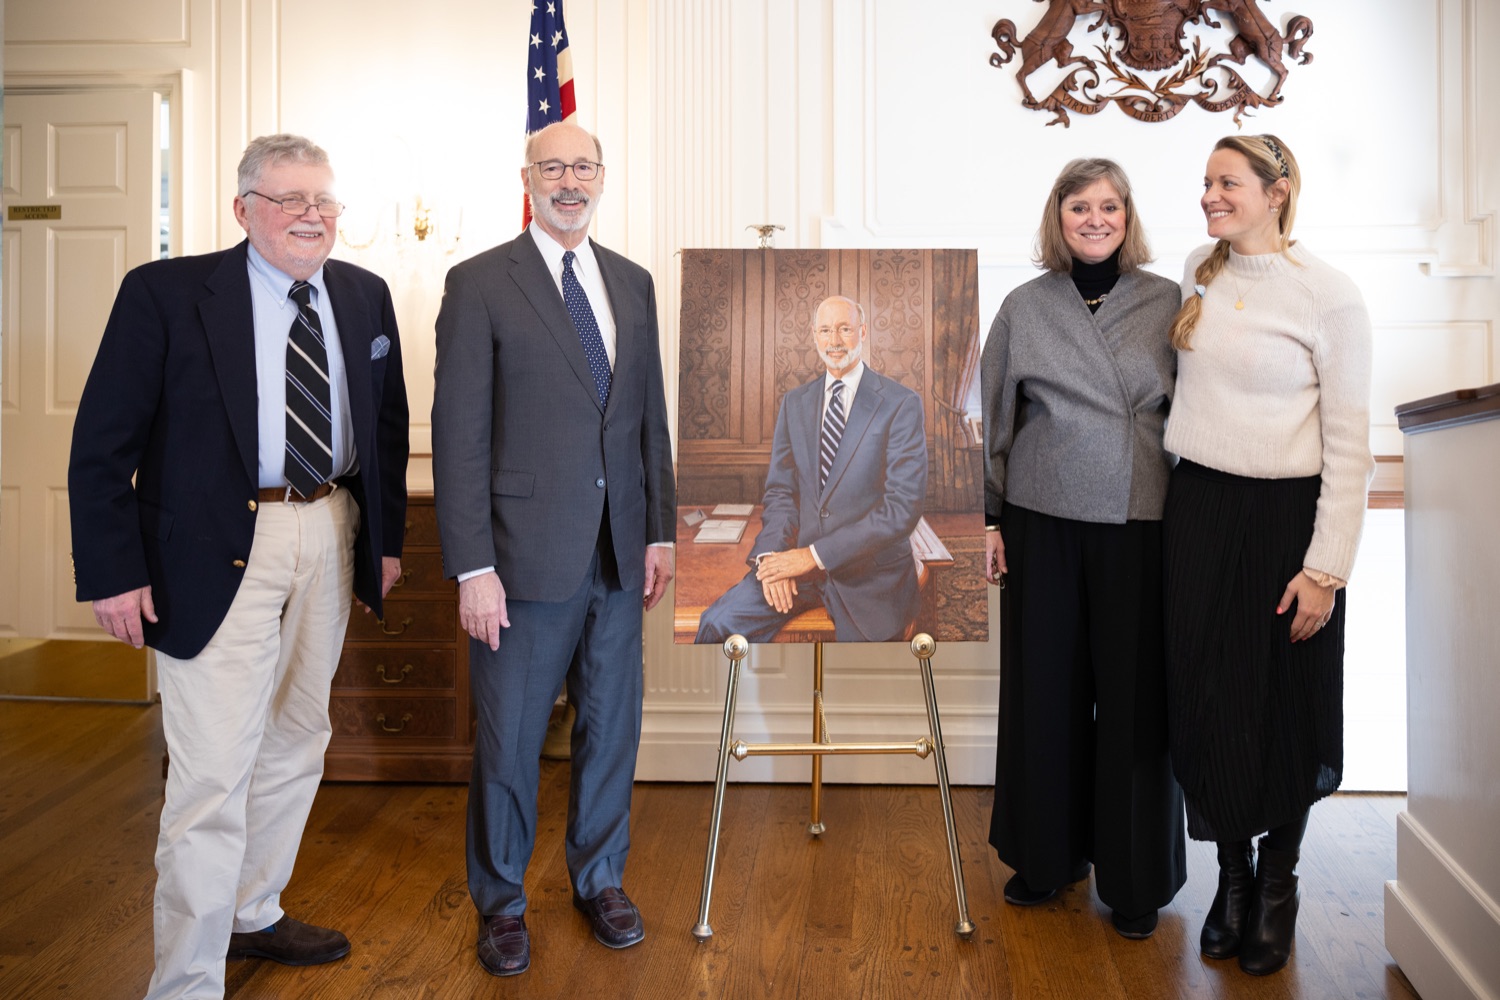 On January 10, 2023 at the Pennsylvania Governors Residence, Governor Wolf unveils his portrait that will hang in the Governors Office at the Pennsylvania State Capitol.  JANUARY 10, 2023 - HARRISBURG, PA<br><a href="https://filesource.amperwave.net/commonwealthofpa/photo/22524_gov_legacy_dz_011.JPG" target="_blank">⇣ Download Photo</a>